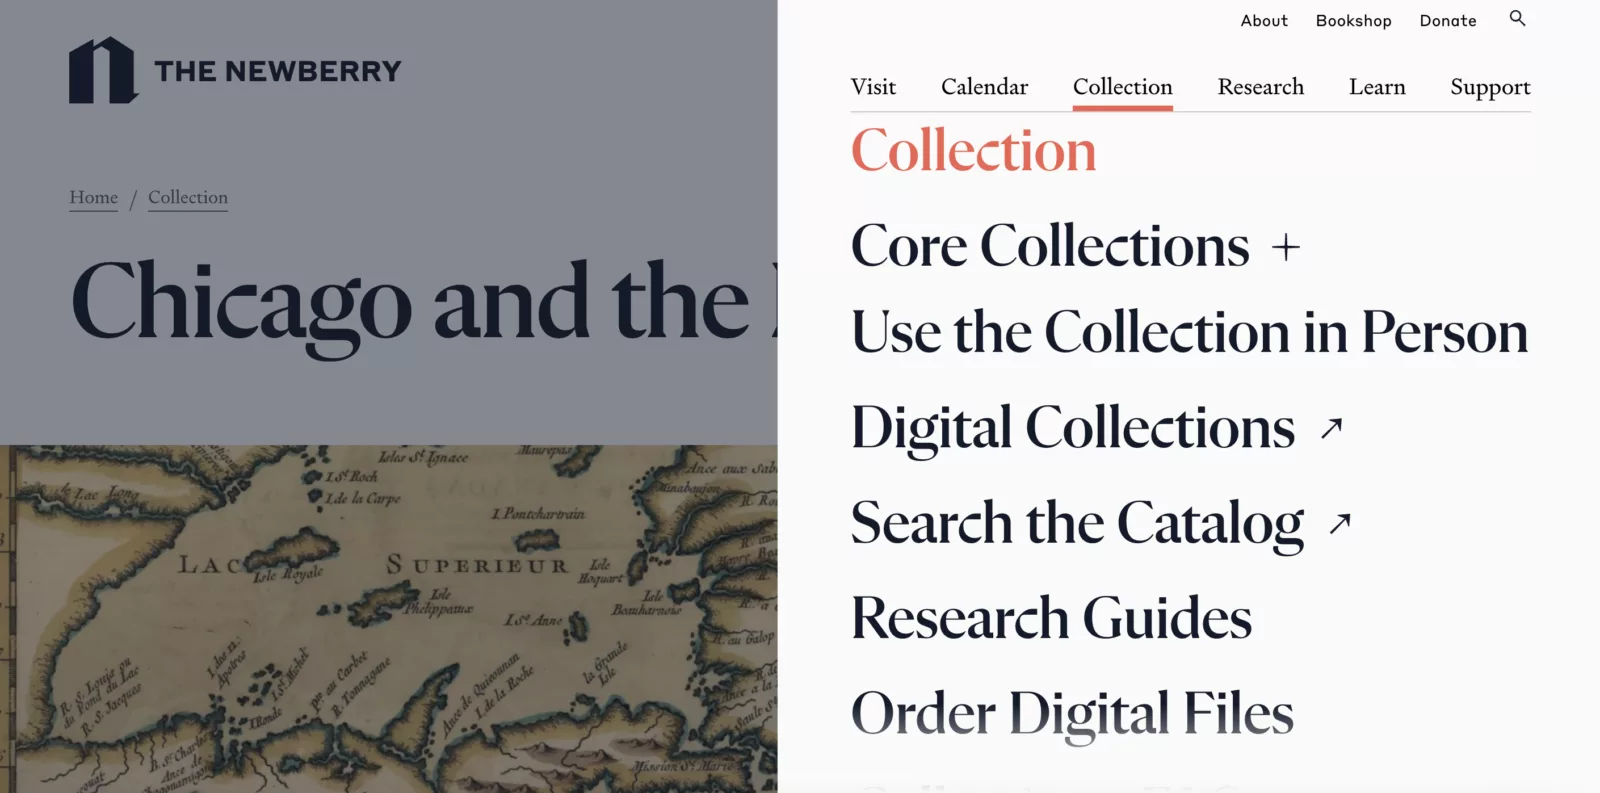 A website menu has a list of pages related to the Newberry collection.